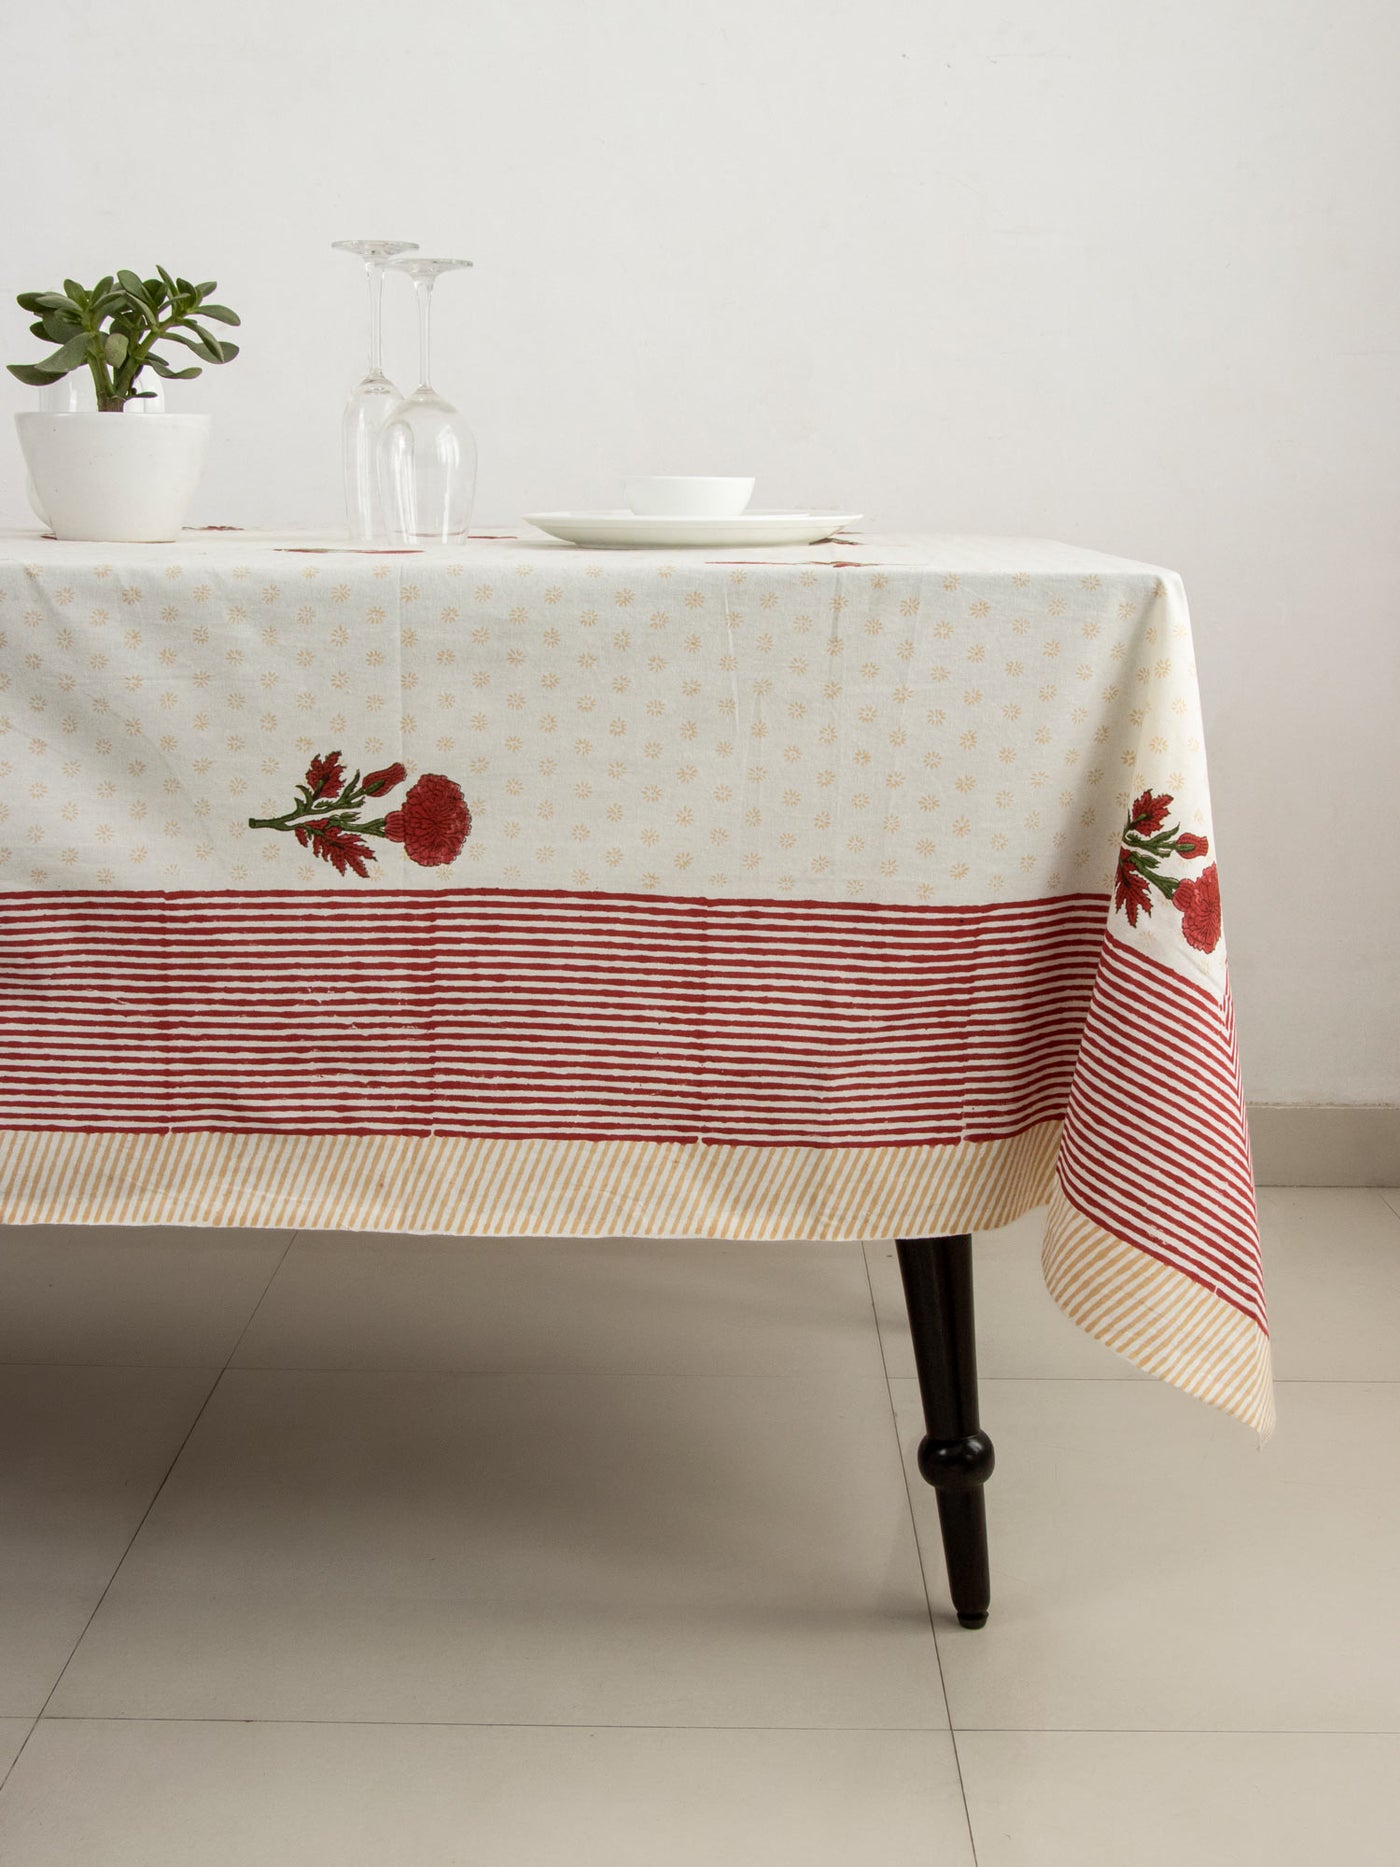 Red Marigold design Table cover with monogram & Parallel border